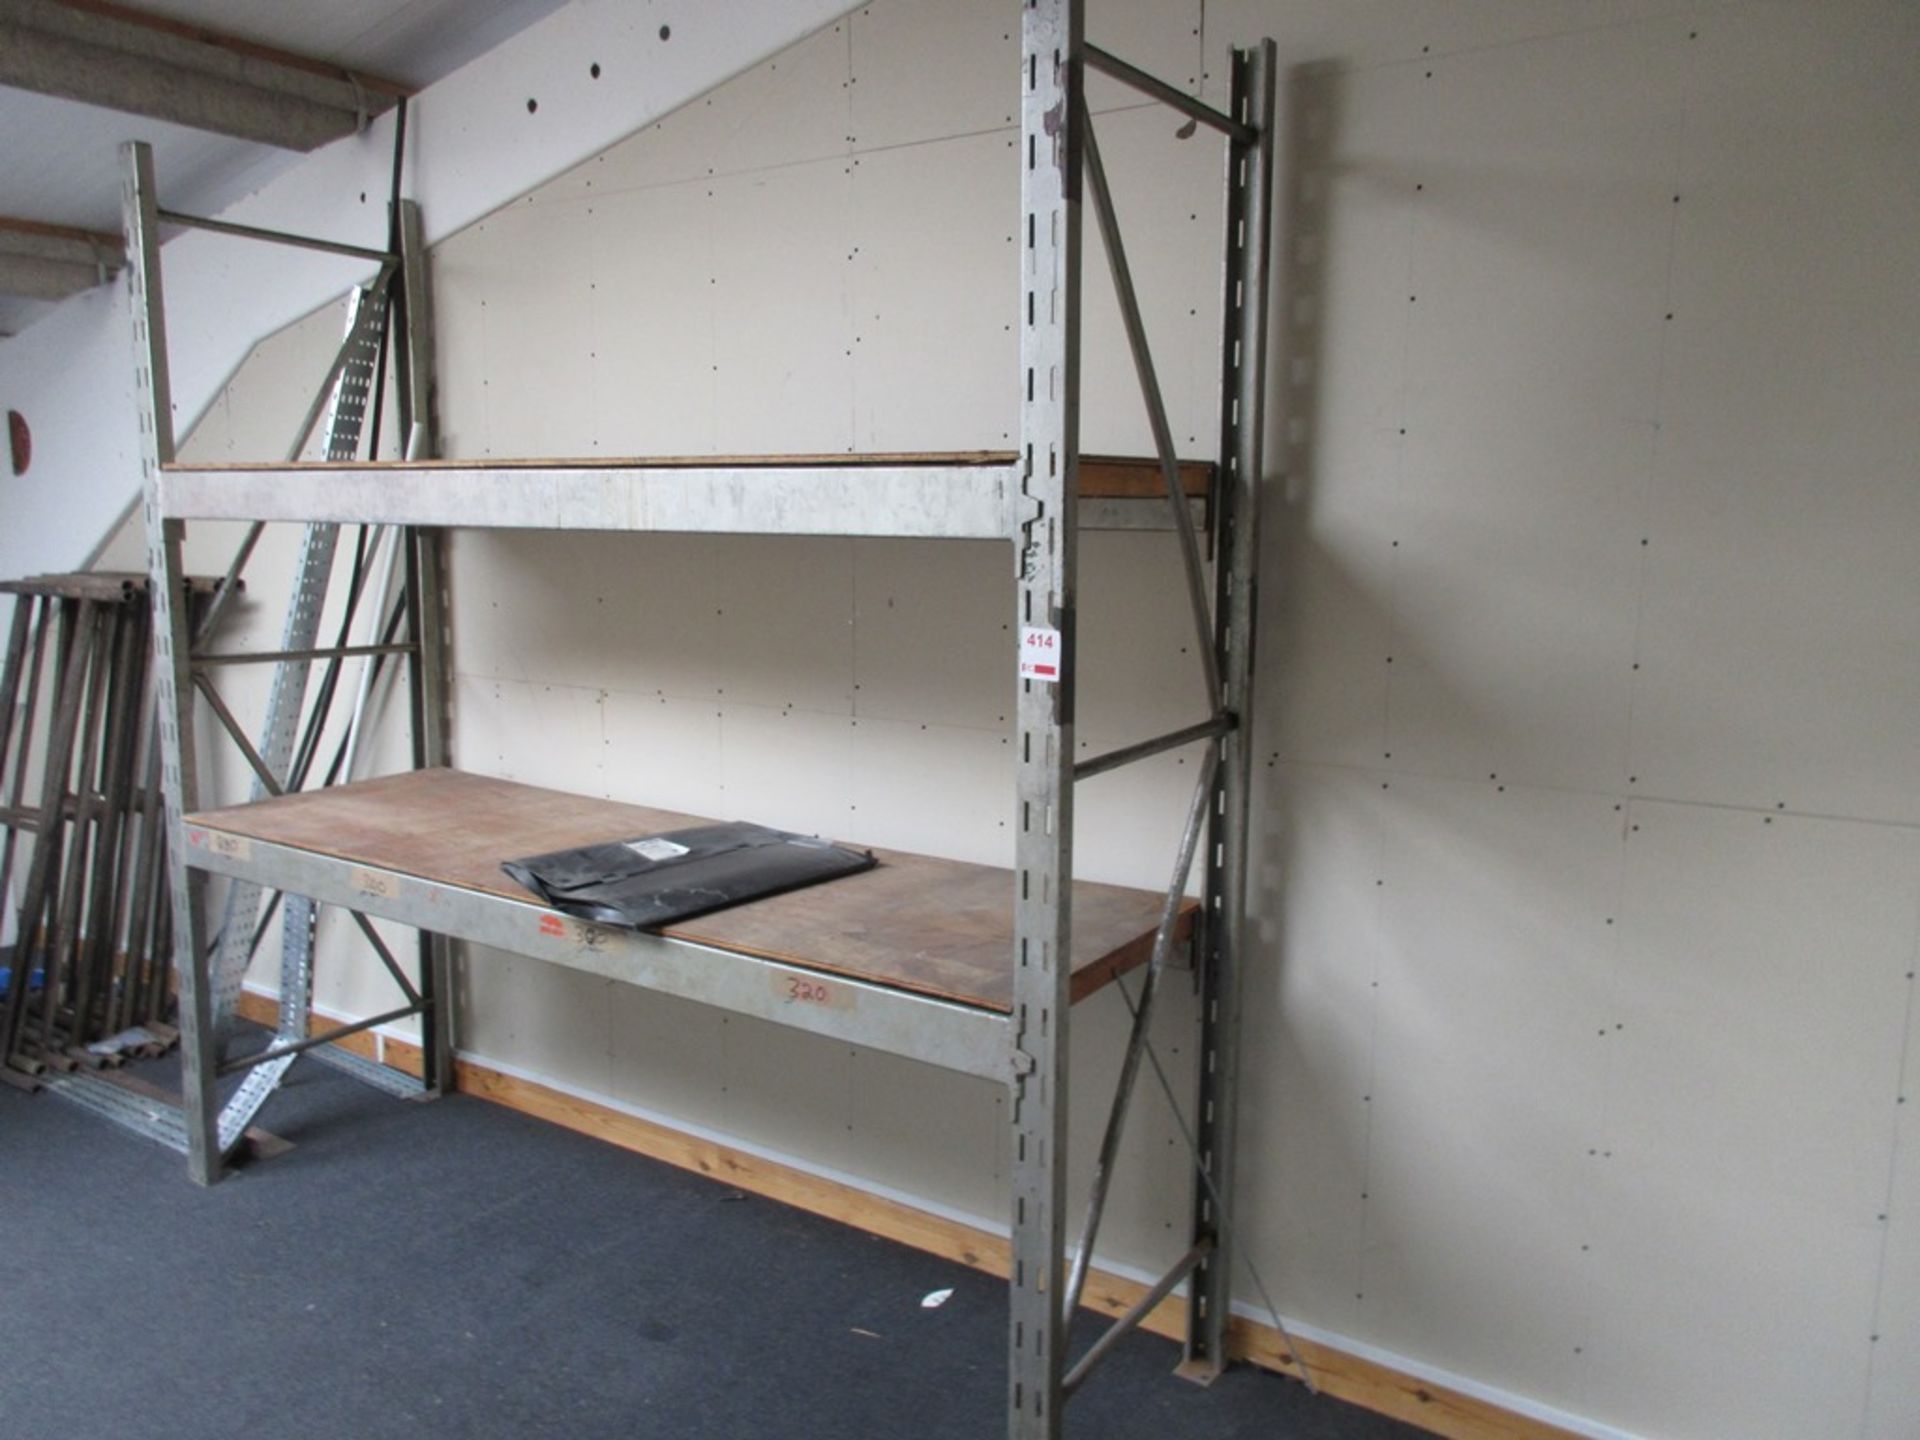 Bay of adjustable boltless racking approx. 2440 x 720mm x height 2440mm and assorted tower scaffol